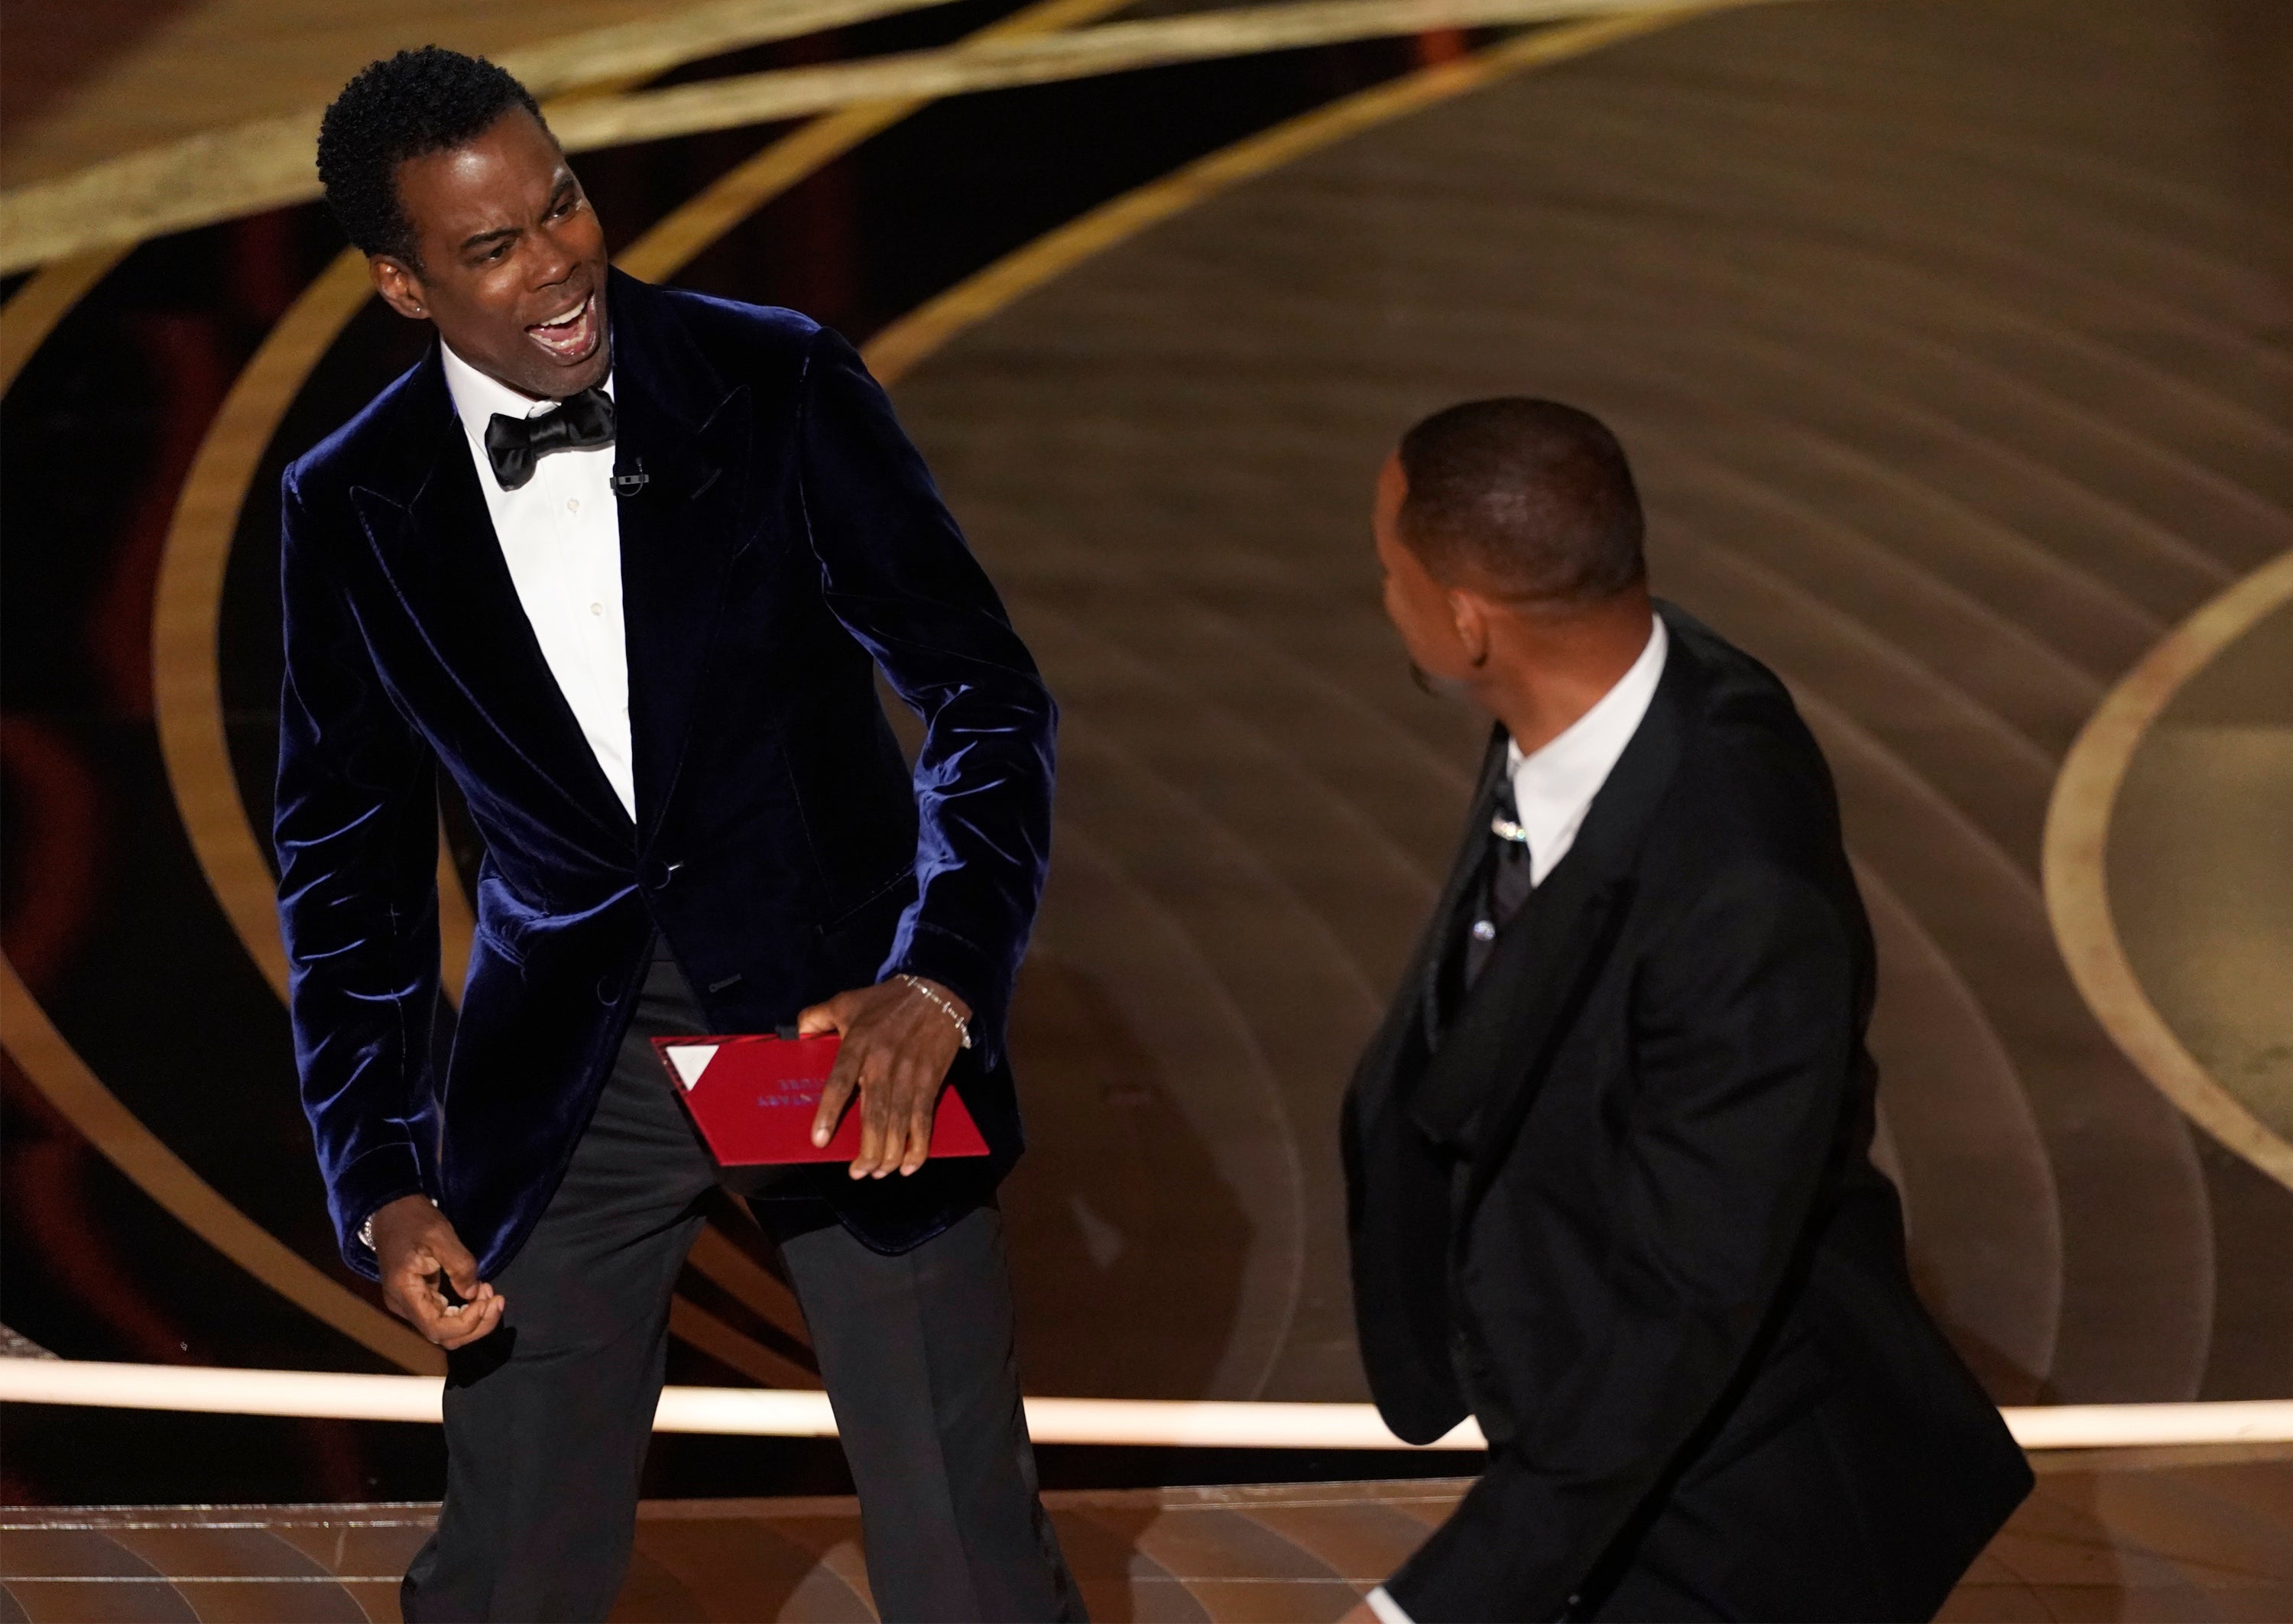 Will Smith struck Chris Rock after he made a joke about his wife, Jada Pinkett Smith